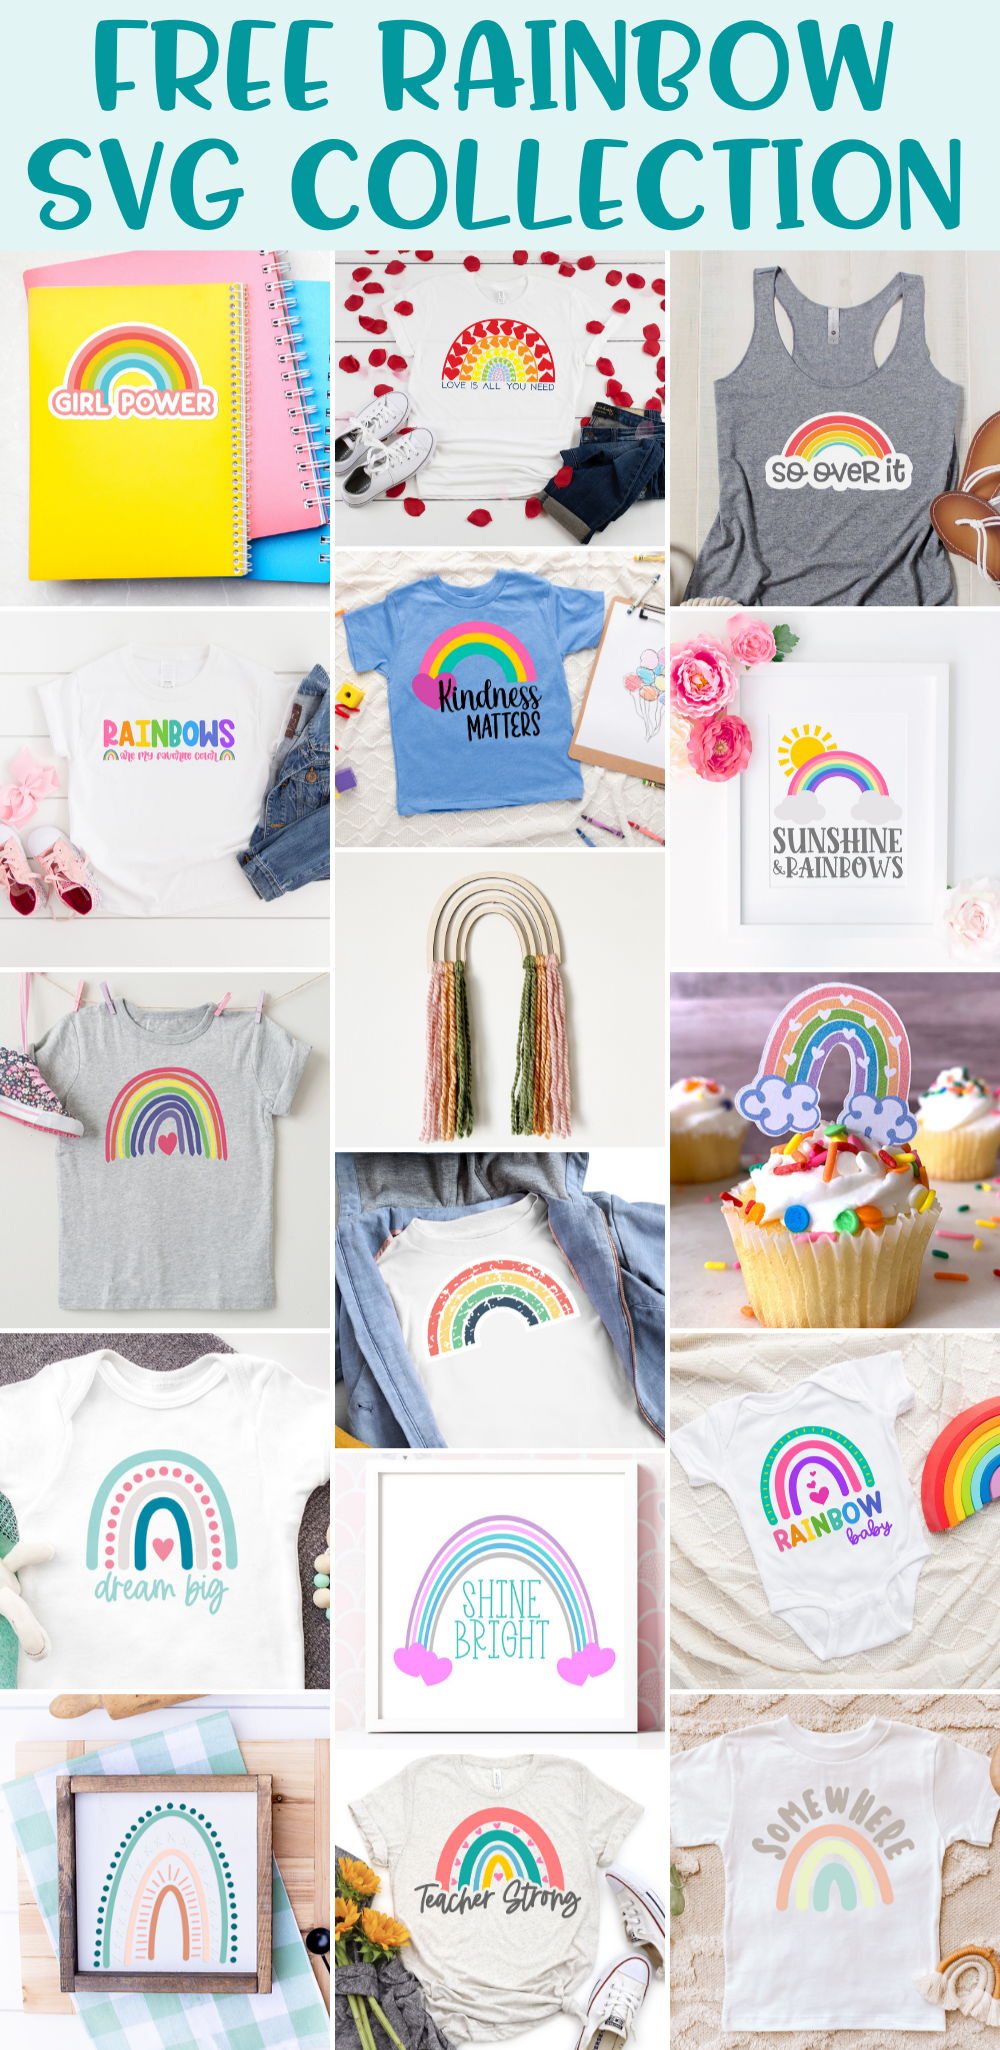 https://www.happygoluckyblog.com/wp-content/uploads/2021/02/Free-Rainbow-SVG-Collection.png